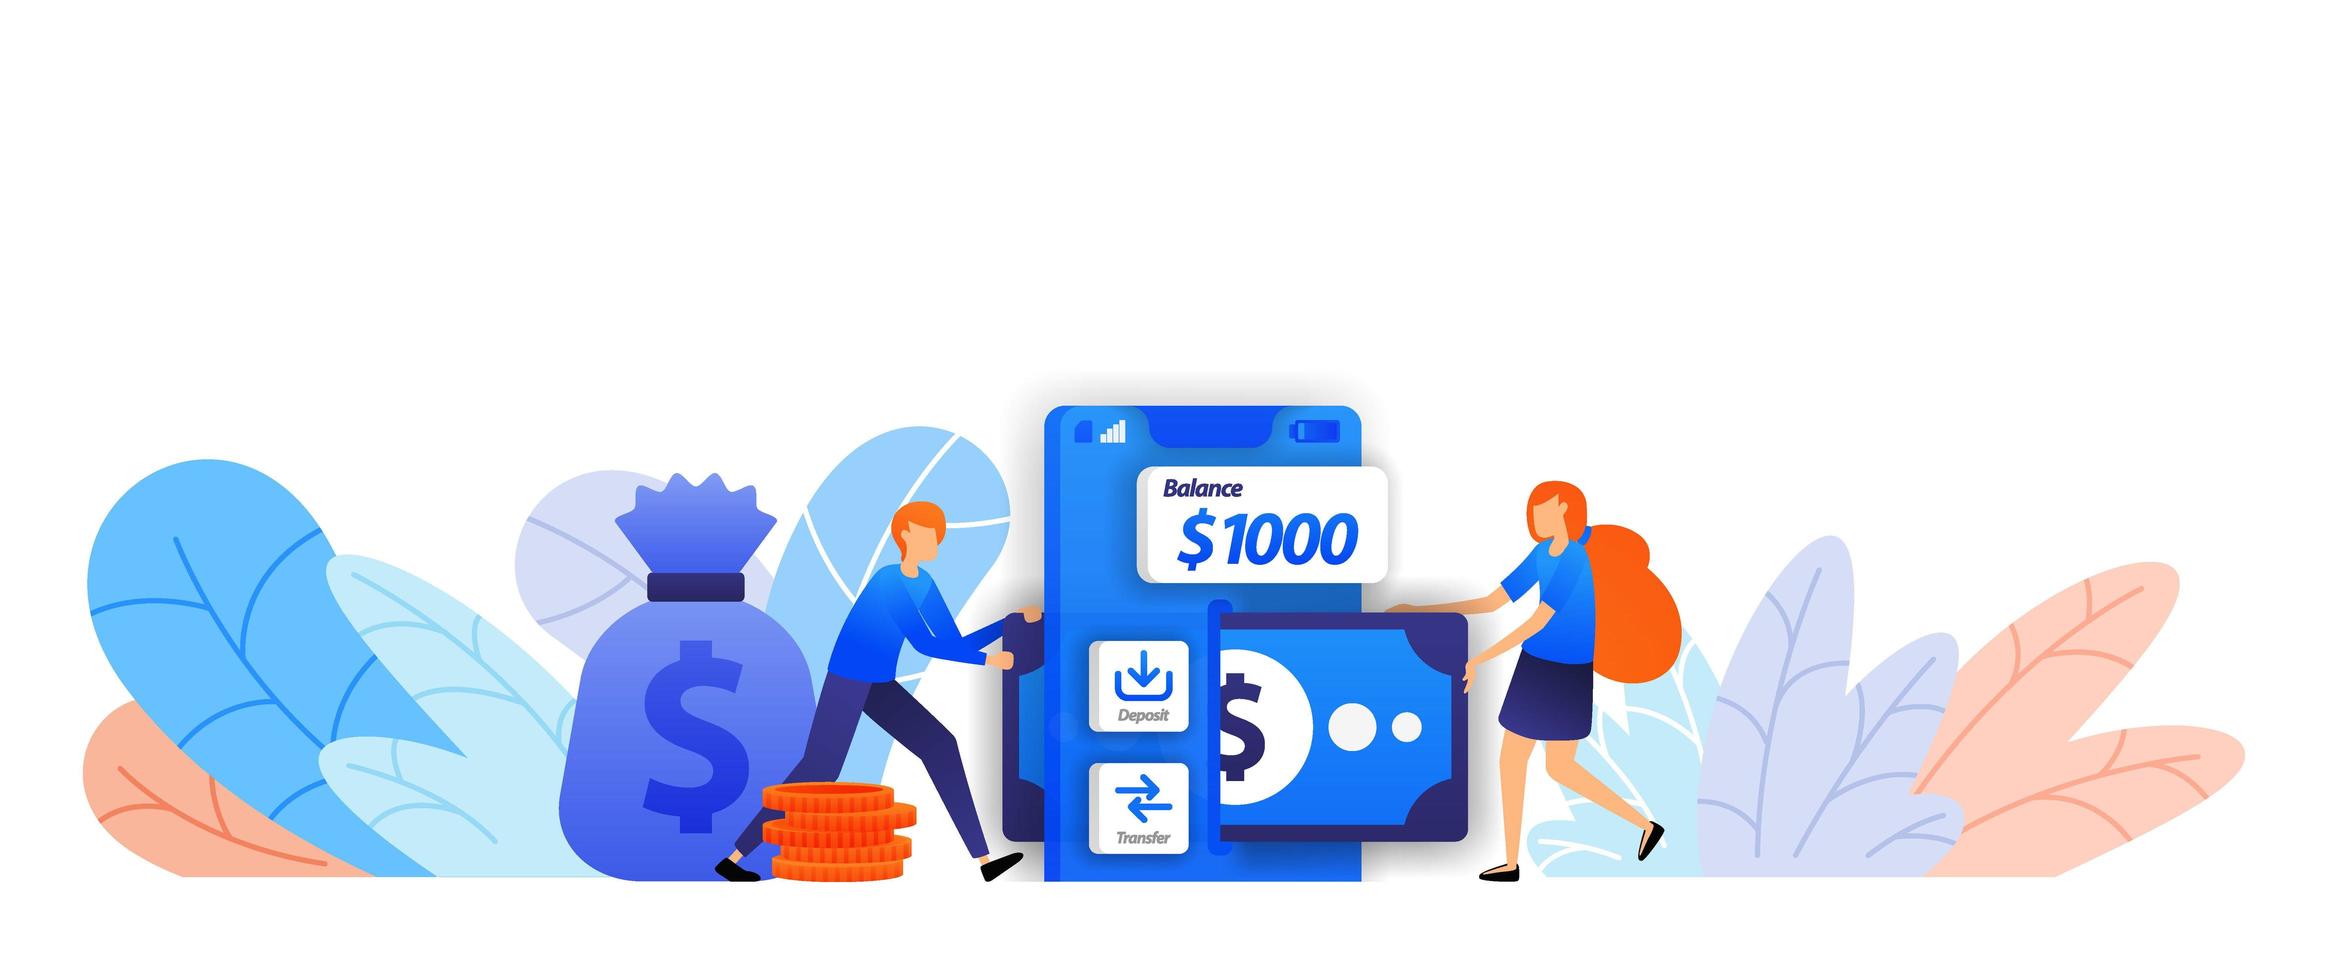 send, save and transfer money easily with mobile application. business transaction loan with an online system vector illustration concept for landing page, web, ui, banner, flyer, poster, background